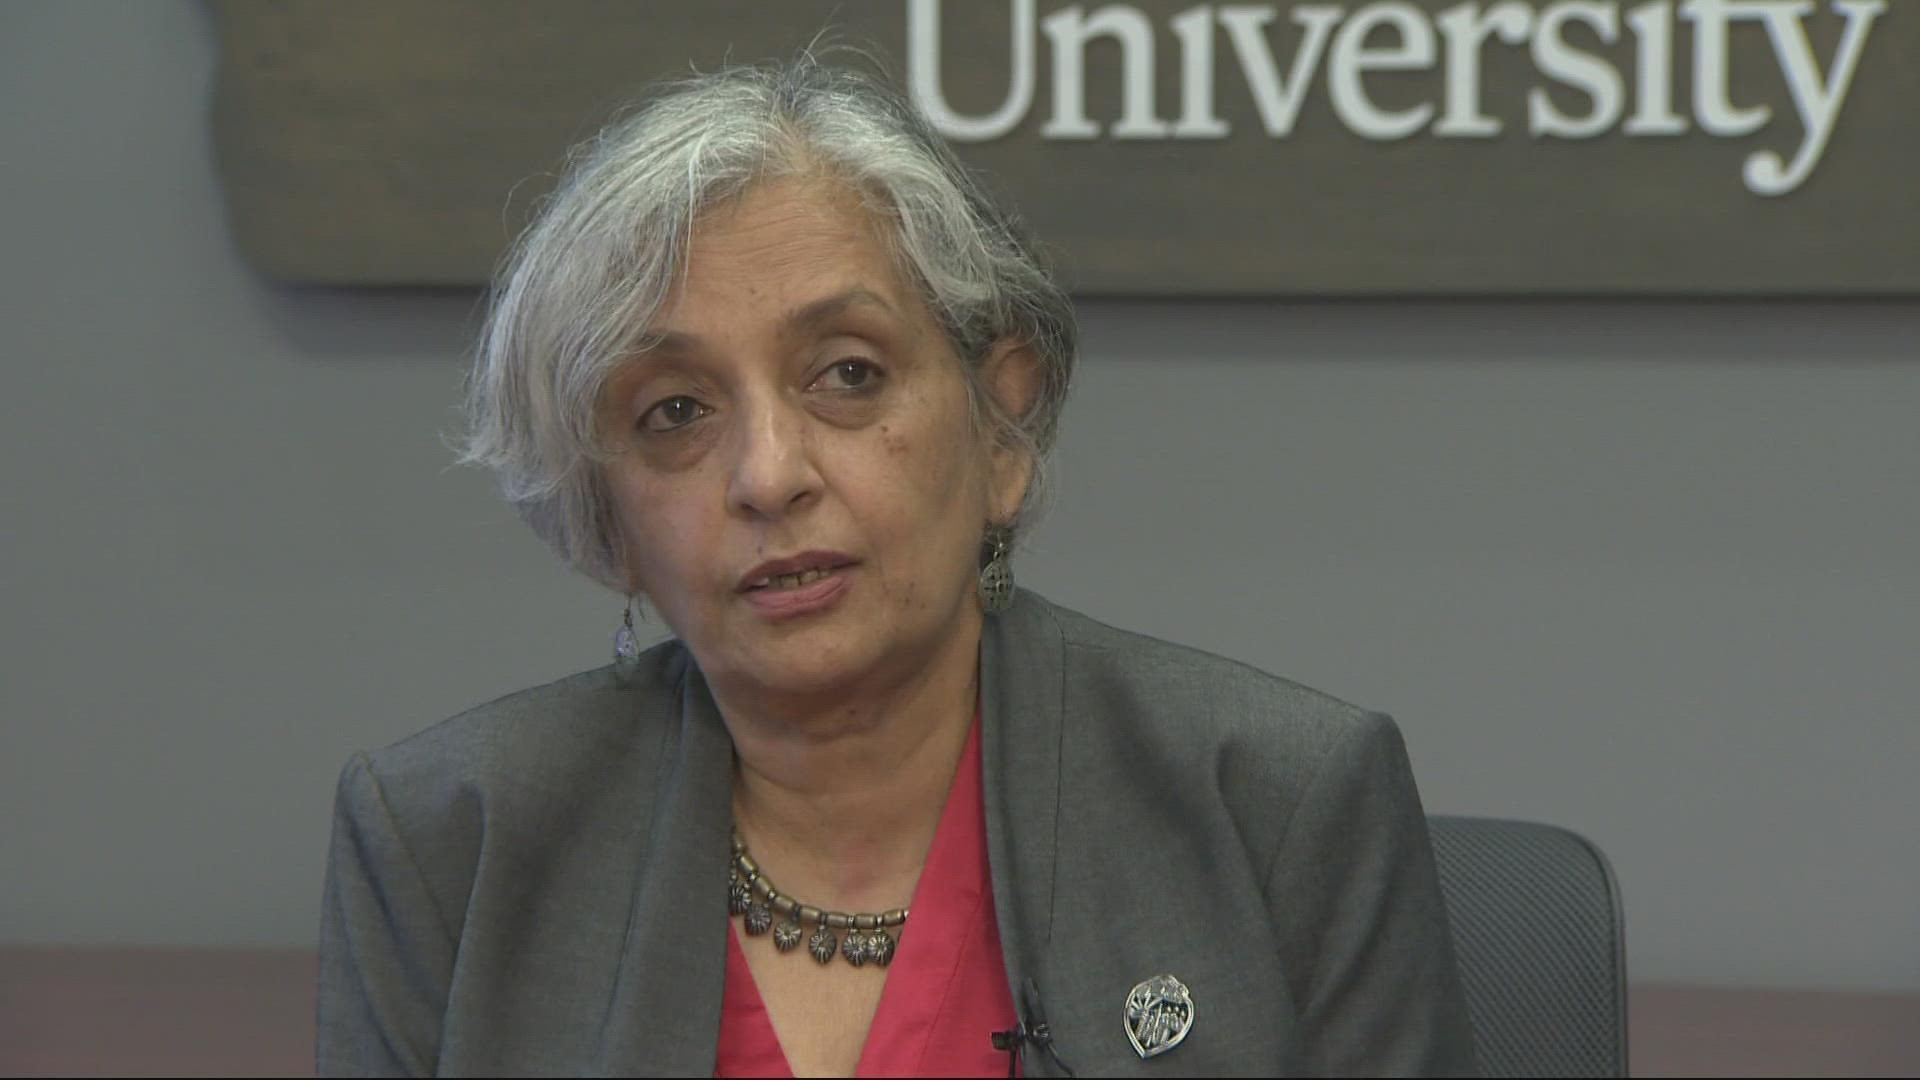 Dr. Jayathi Murthy is the new president of Oregon State University. She succeeds former president F. King Alexander, who resigned last year.